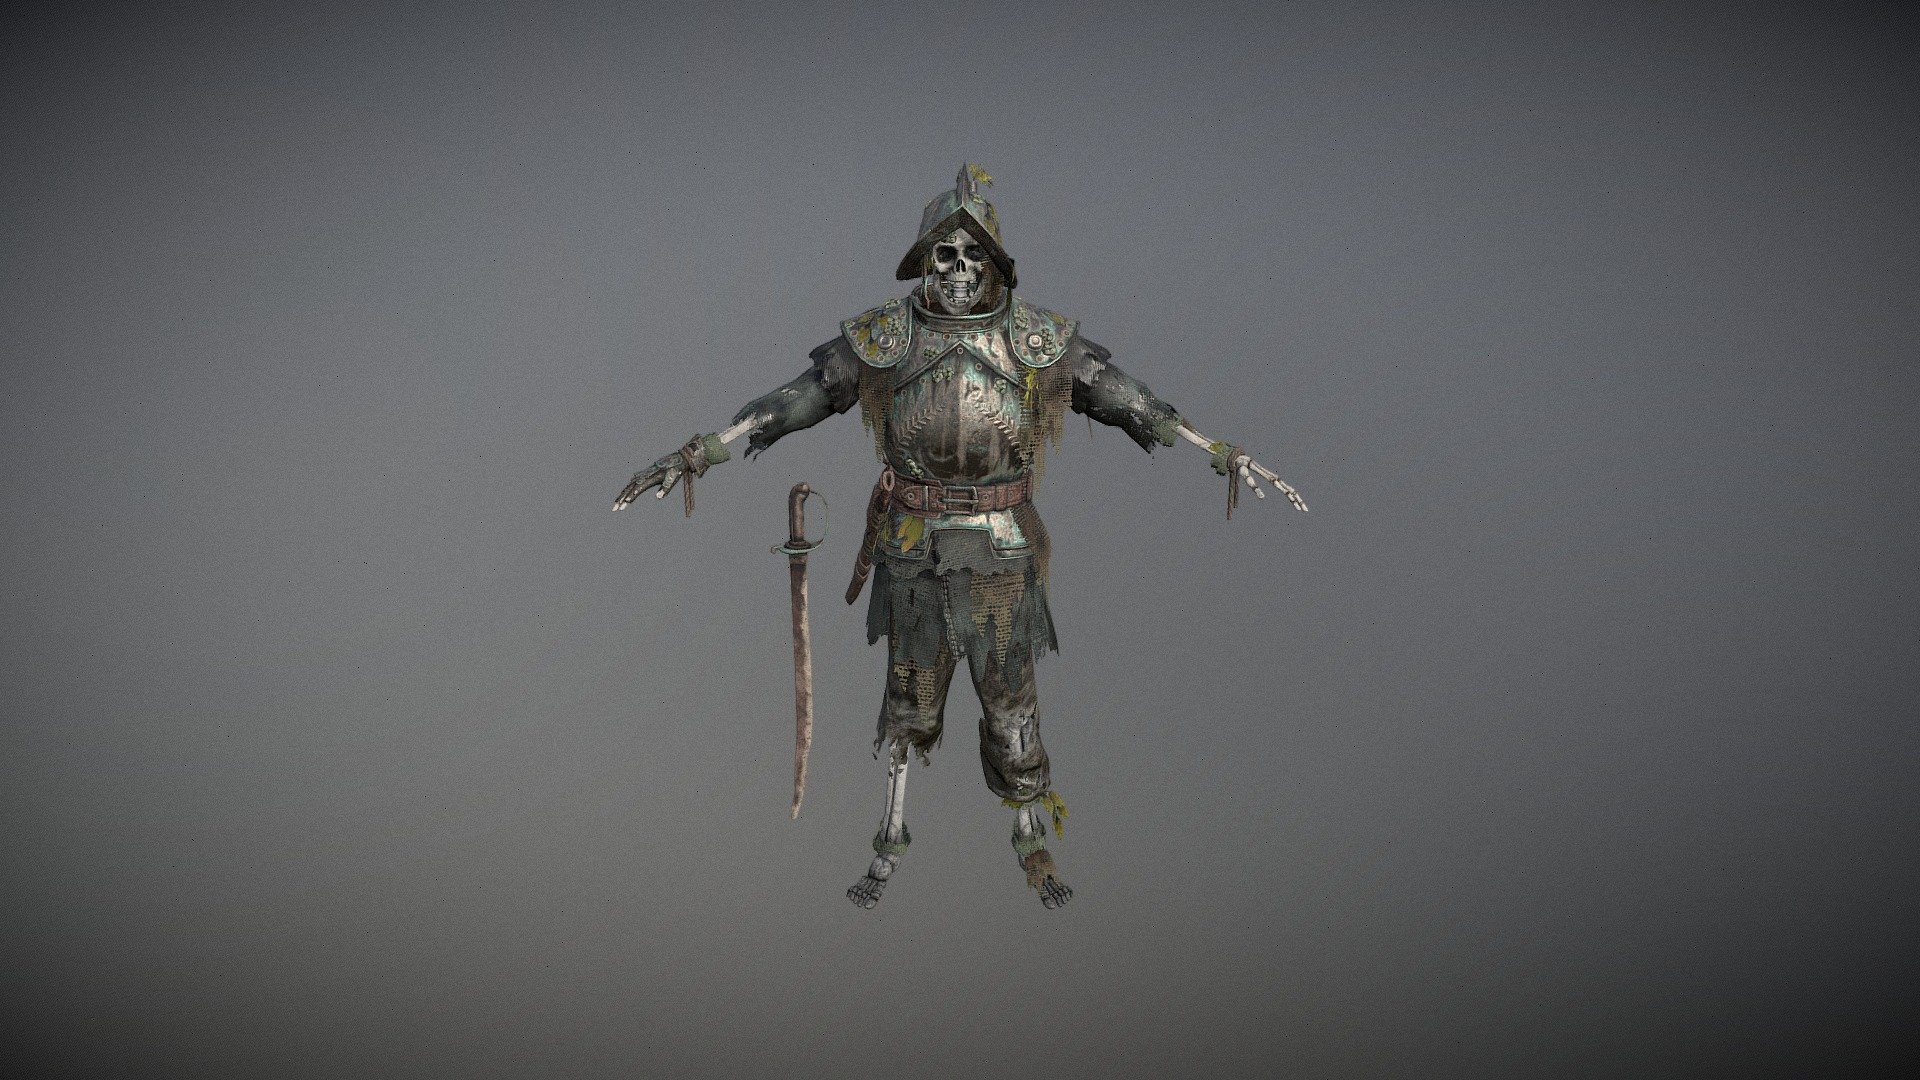 A conqueror's corpse.
A Skeleton of a spanish conqueror, its gameready 3d model